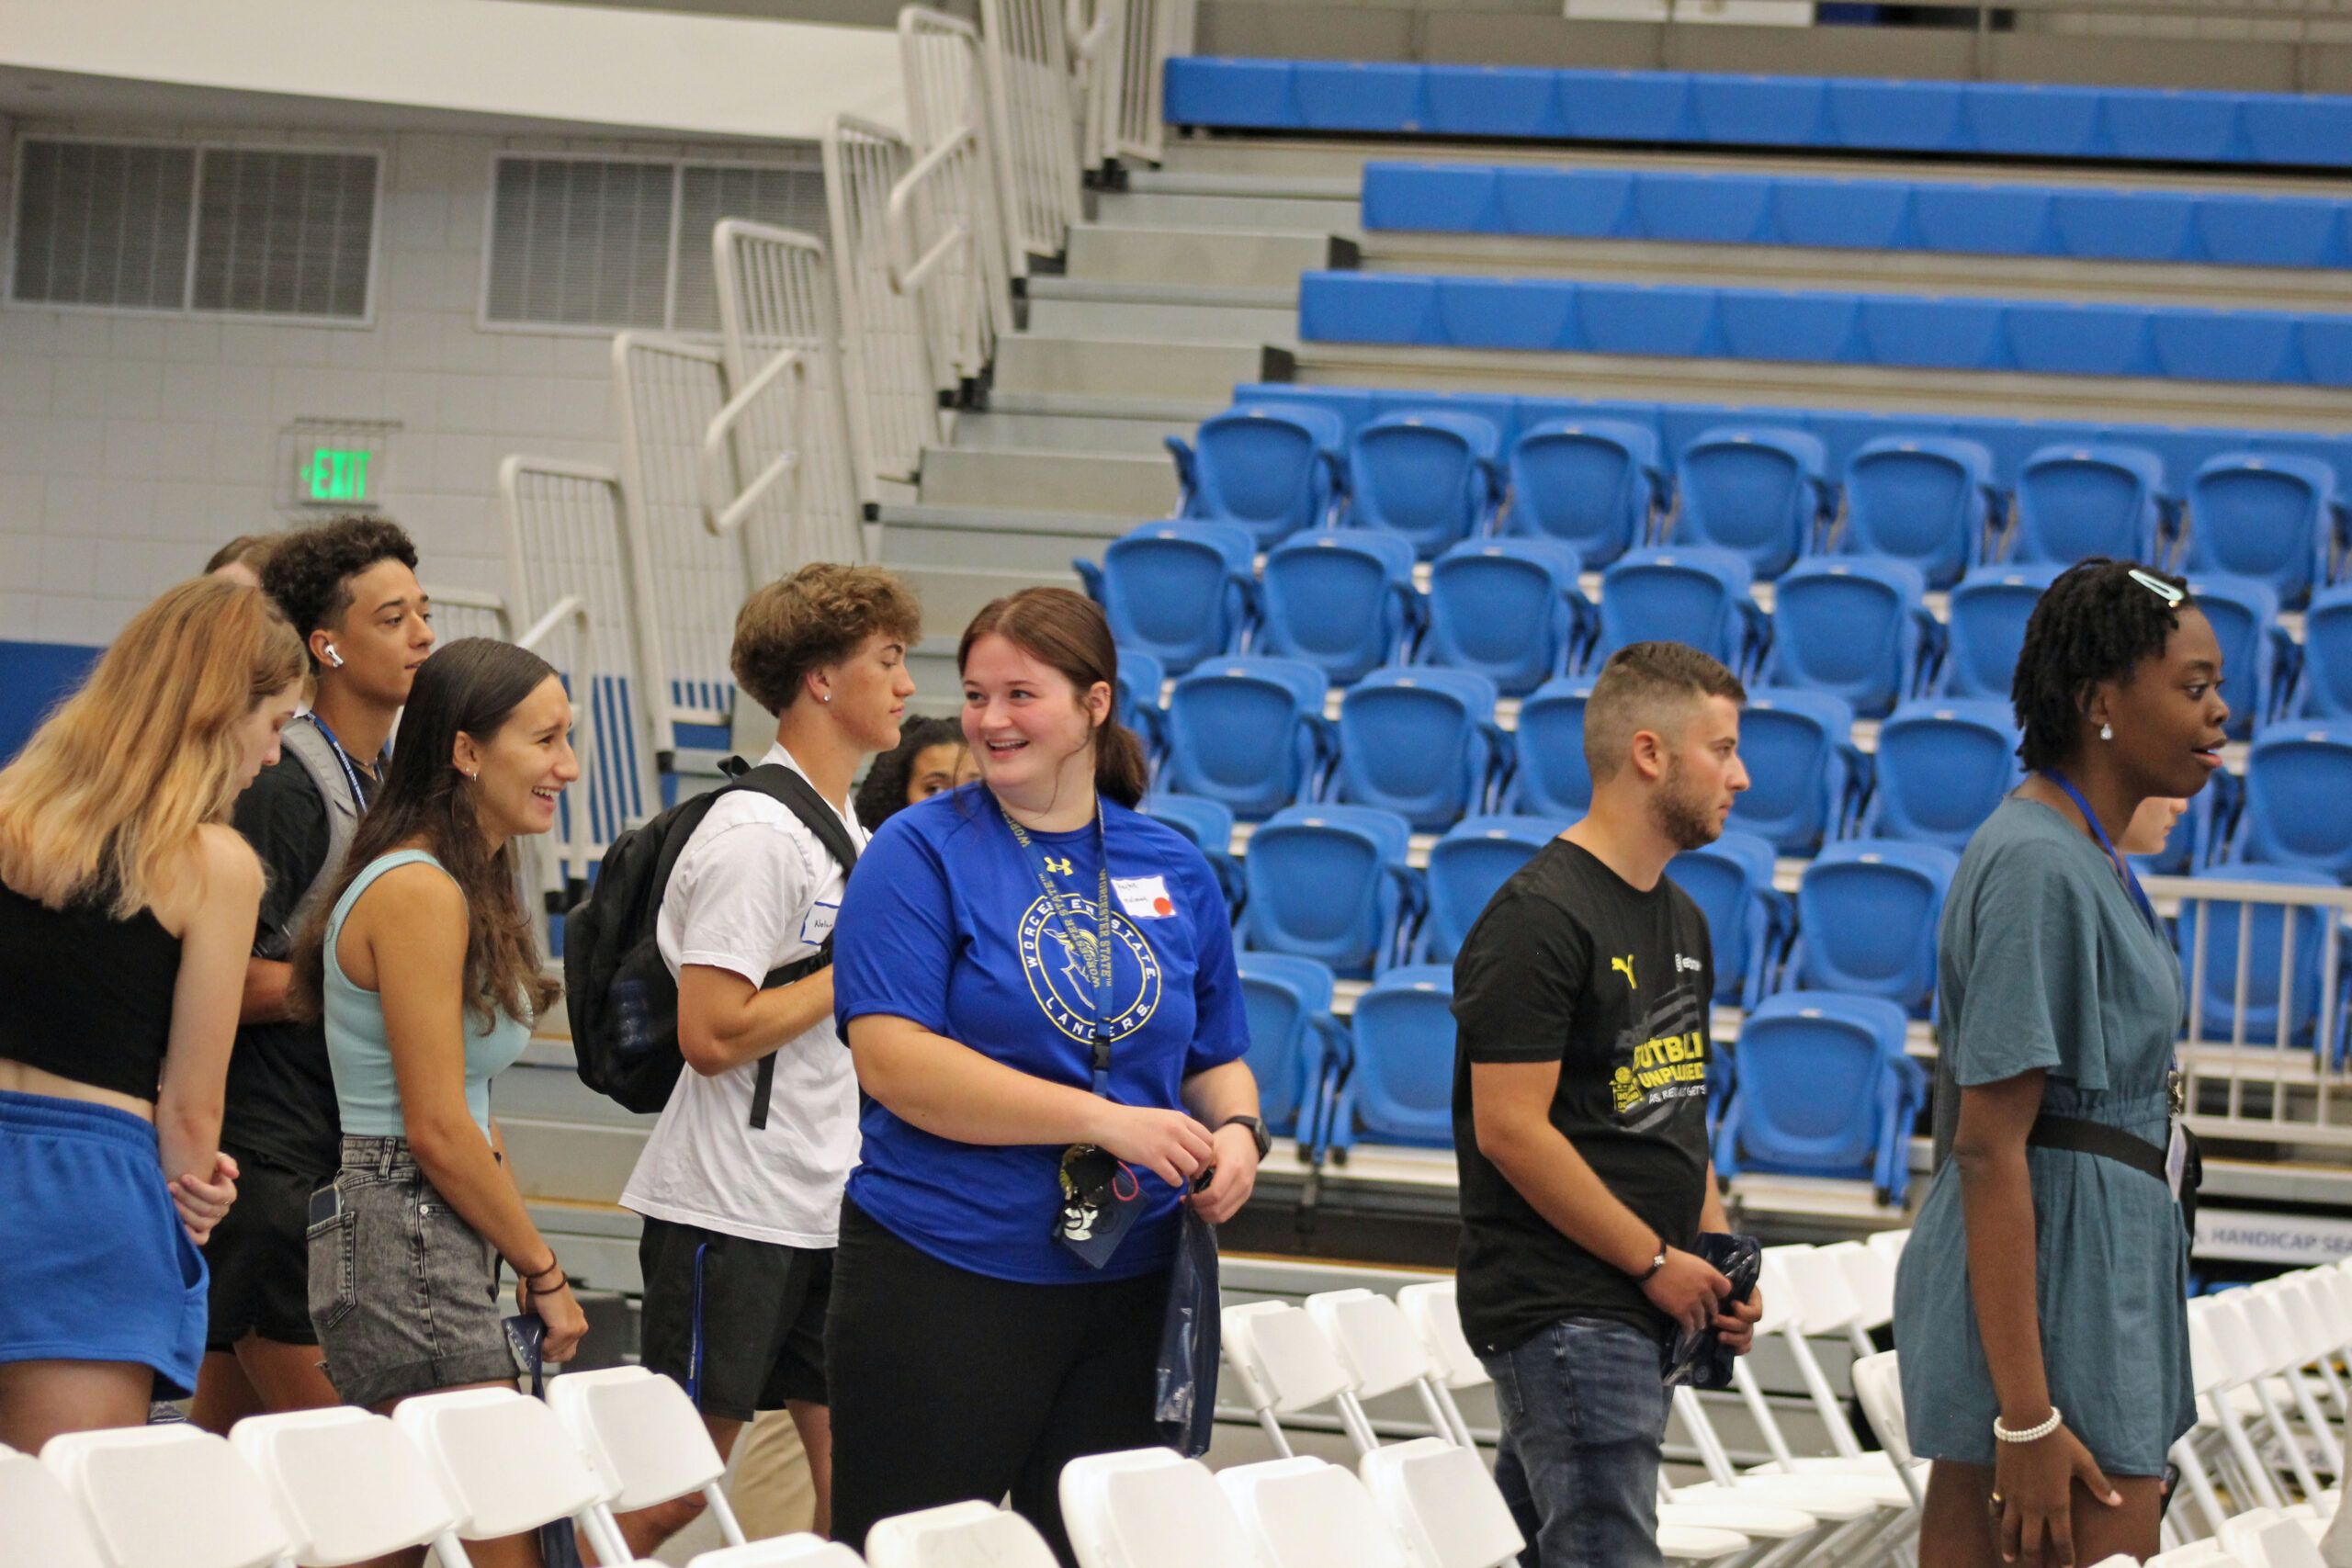 A group of people stands in a gymnasium, some wearing casual clothes and others in sports attire, as they prepare for the Academic Convocation. They are lined up near rows of white folding chairs with blue bleachers in the background.